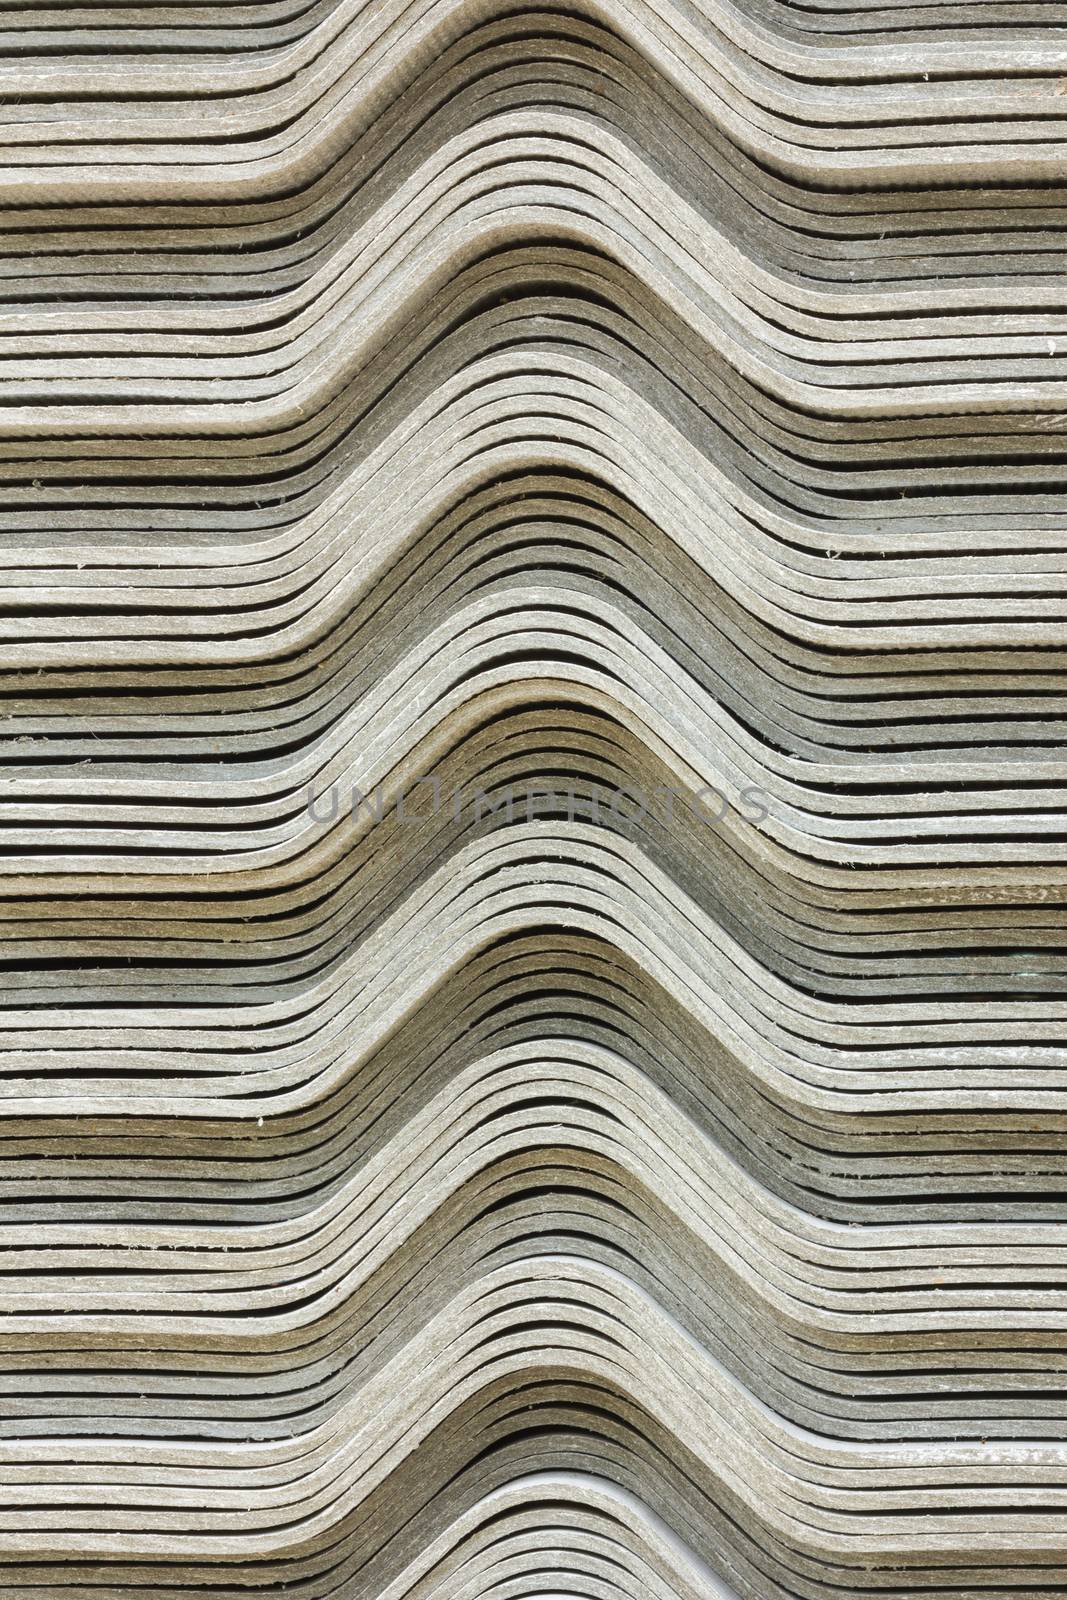 The stack of gypsum board preparing for construction, background by a3701027